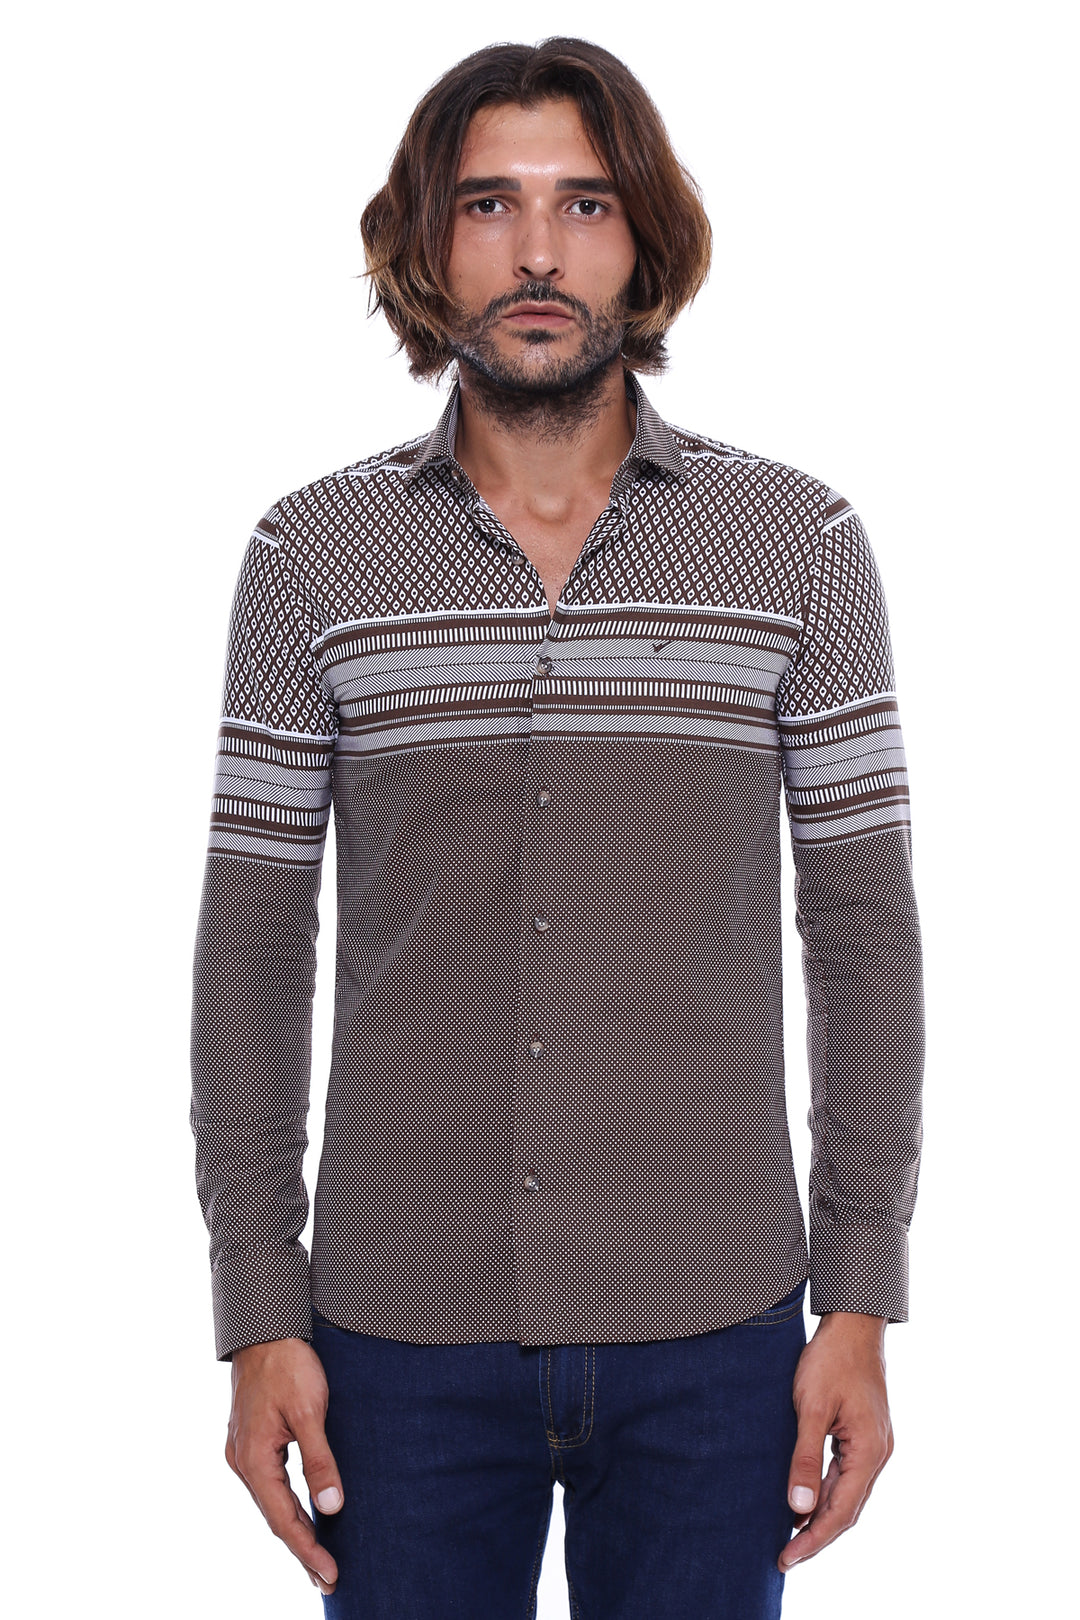 Brown Diamond Patterned Shirt - Wessi